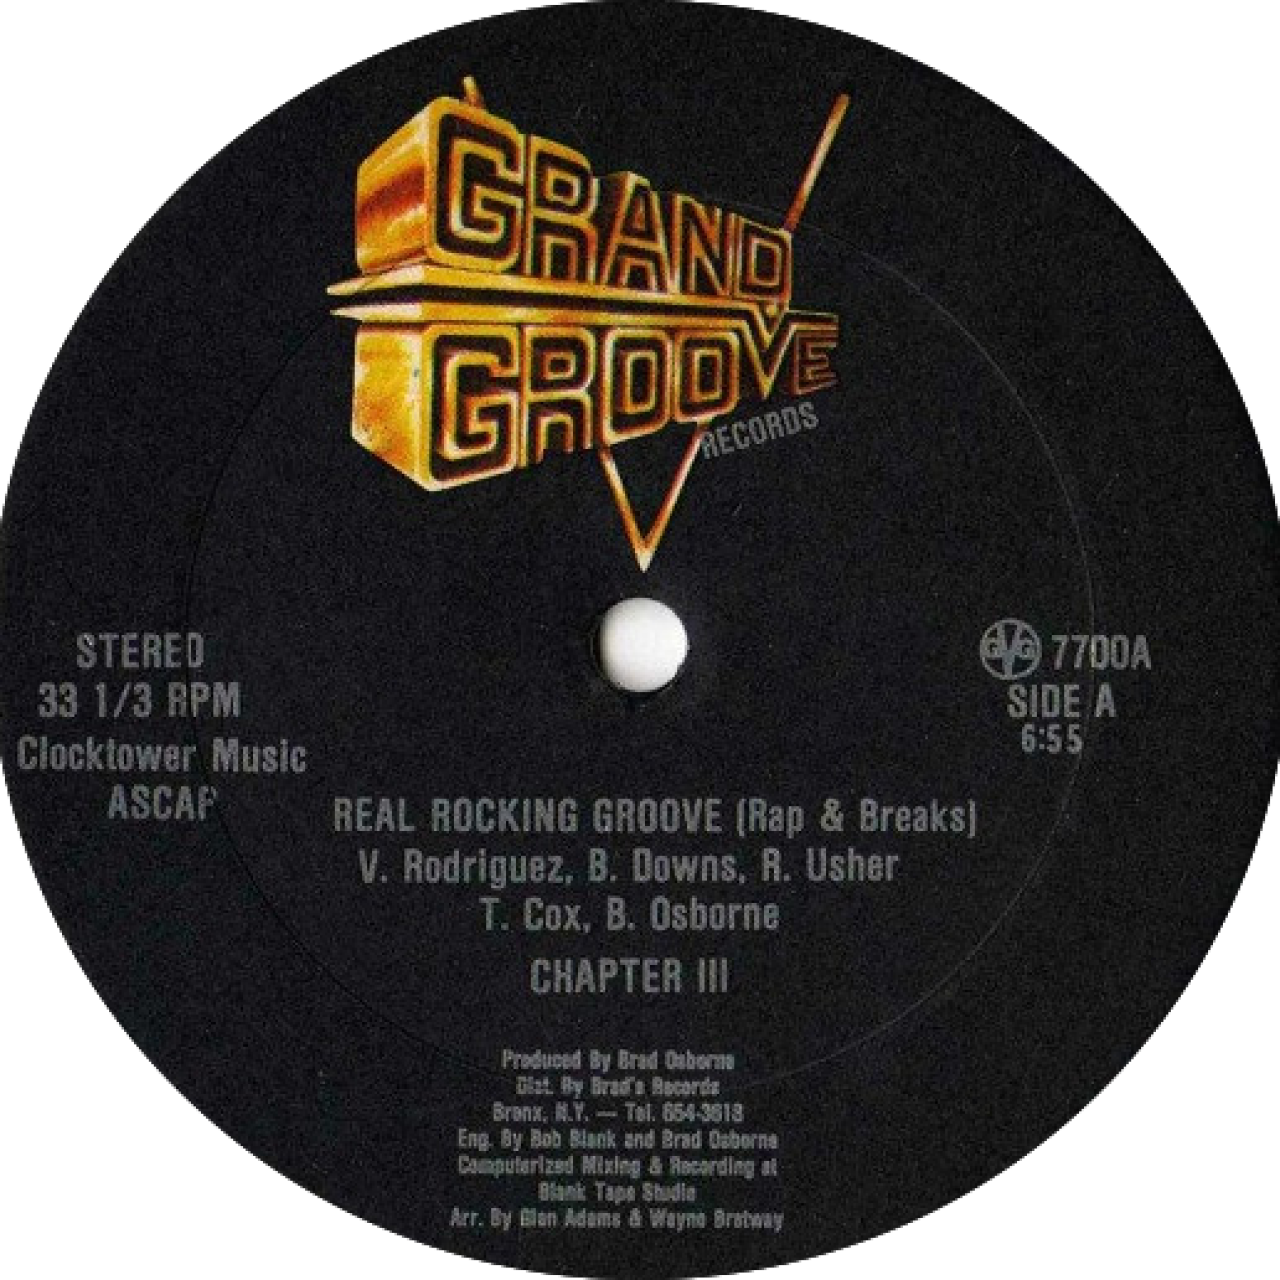 Chapter III - Real Rocking Groove